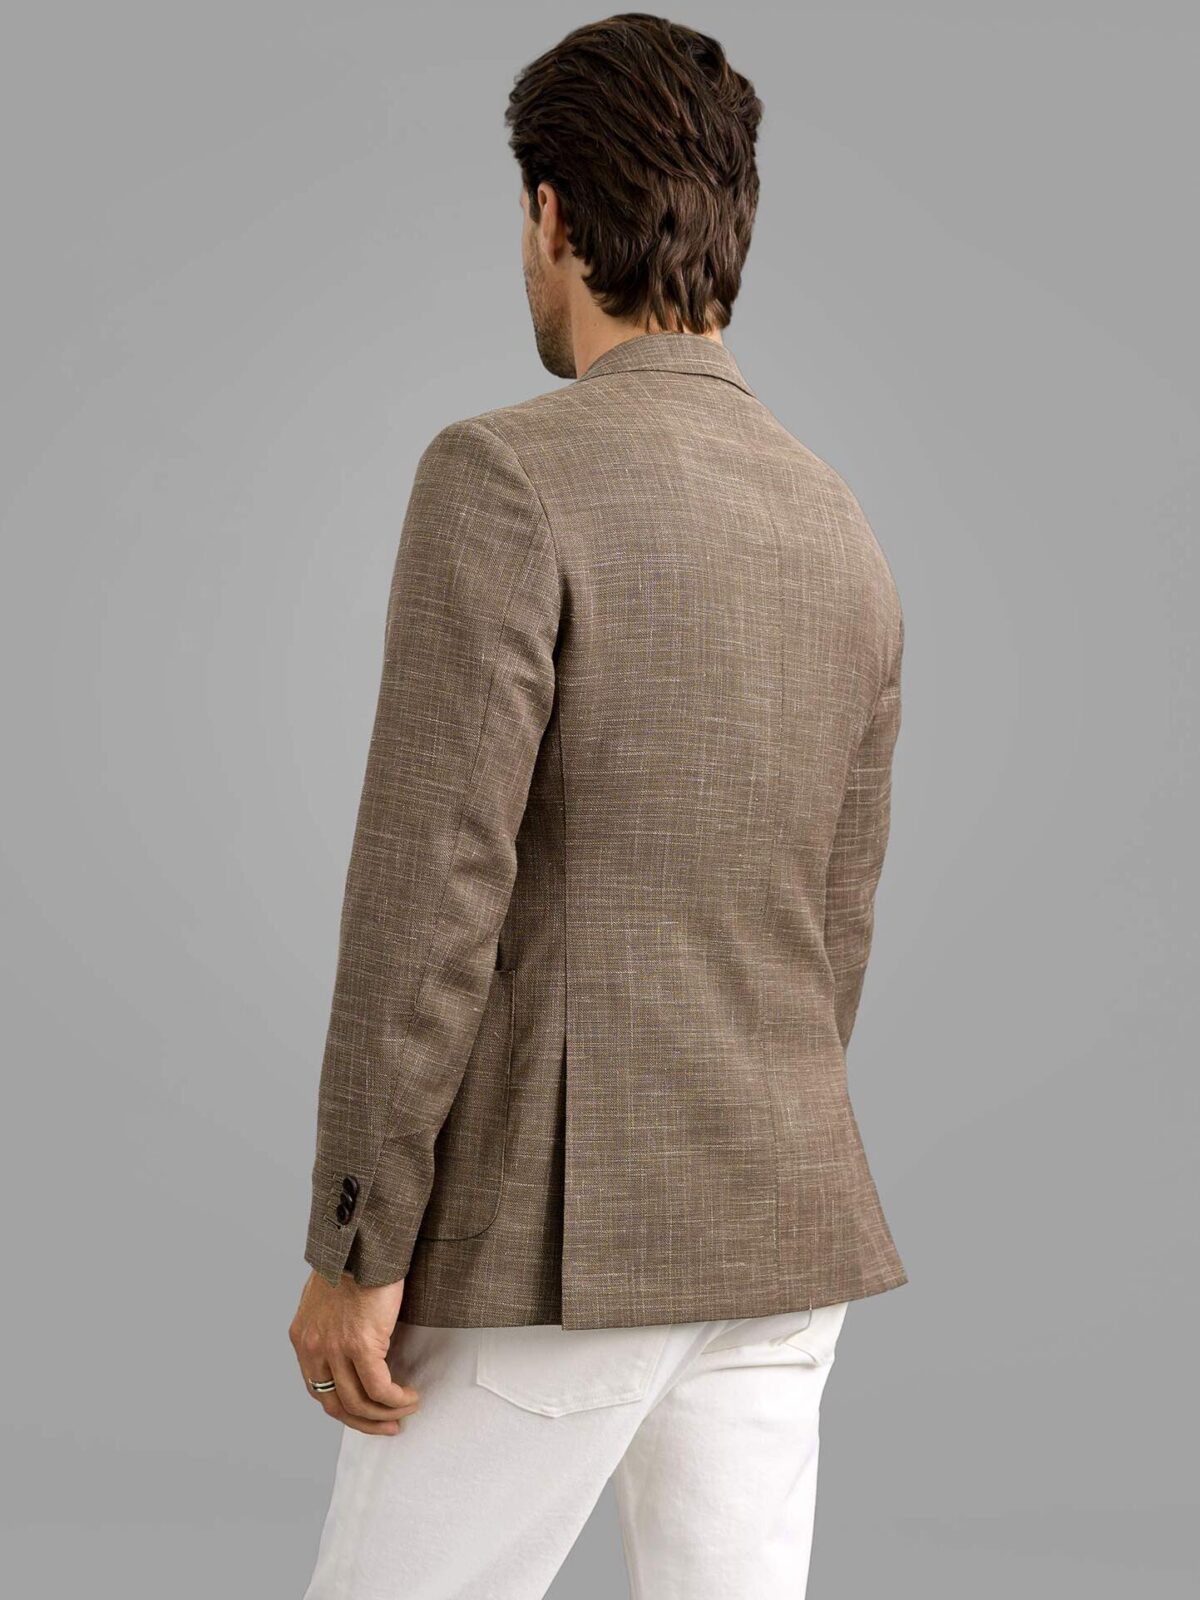 Mocha Wool and Linen Stretch Fit Clothing Custom Tailored Jacket Bedford 